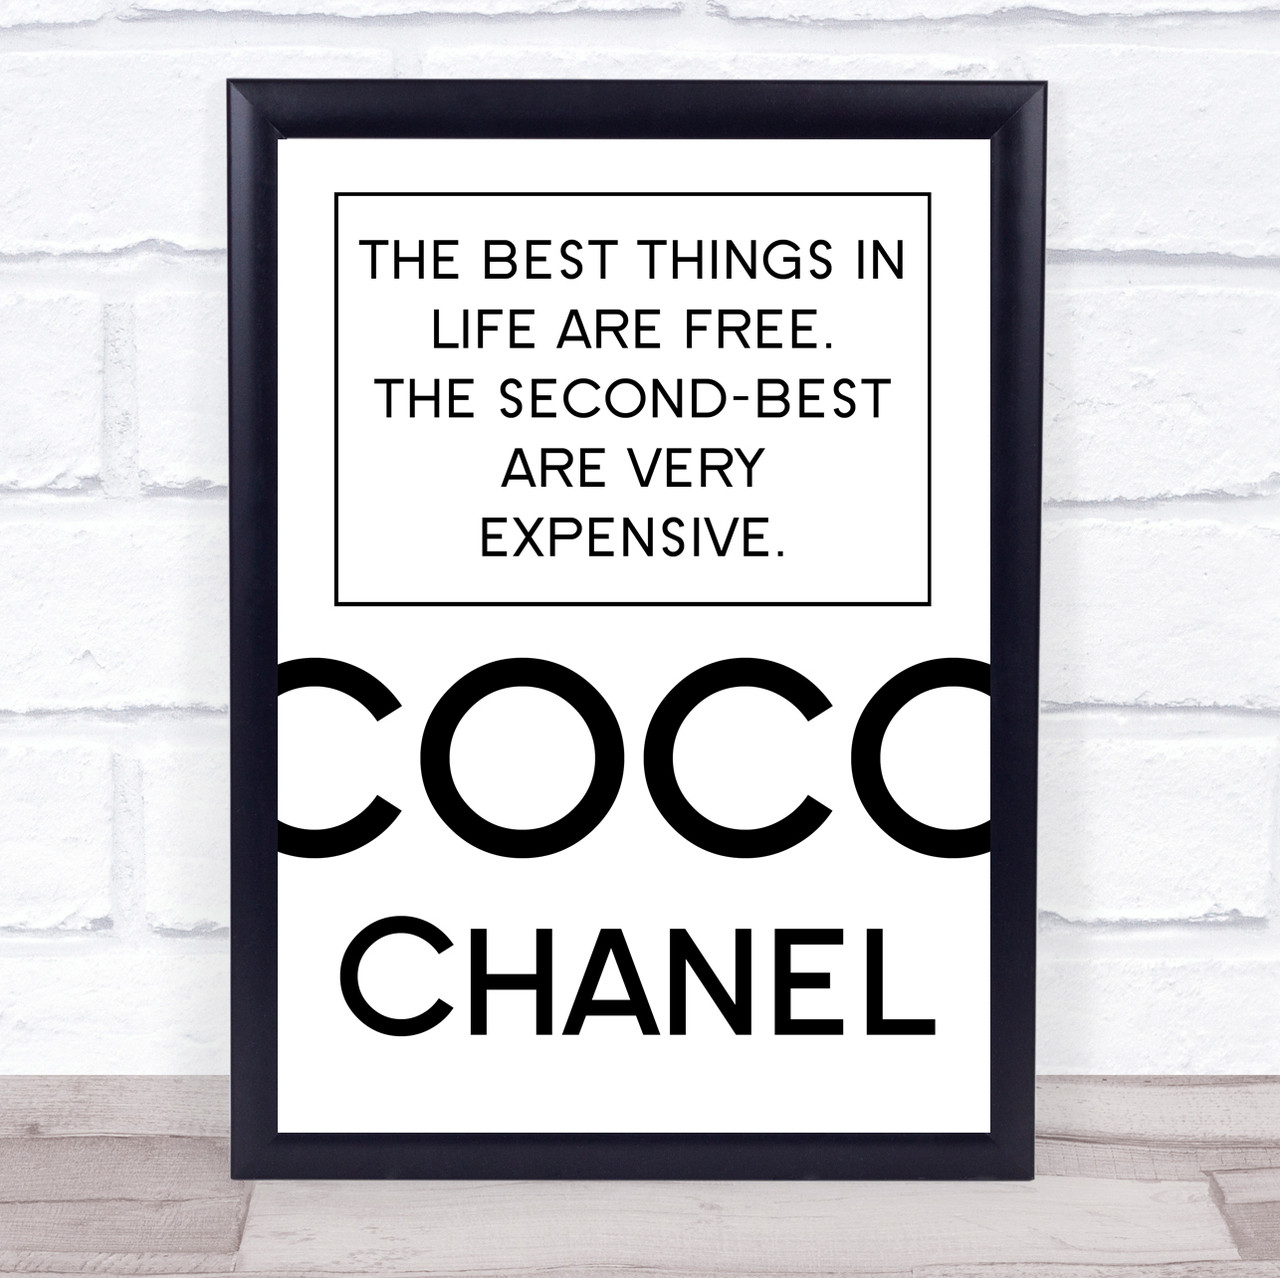 The best things in life are free. The second best are very